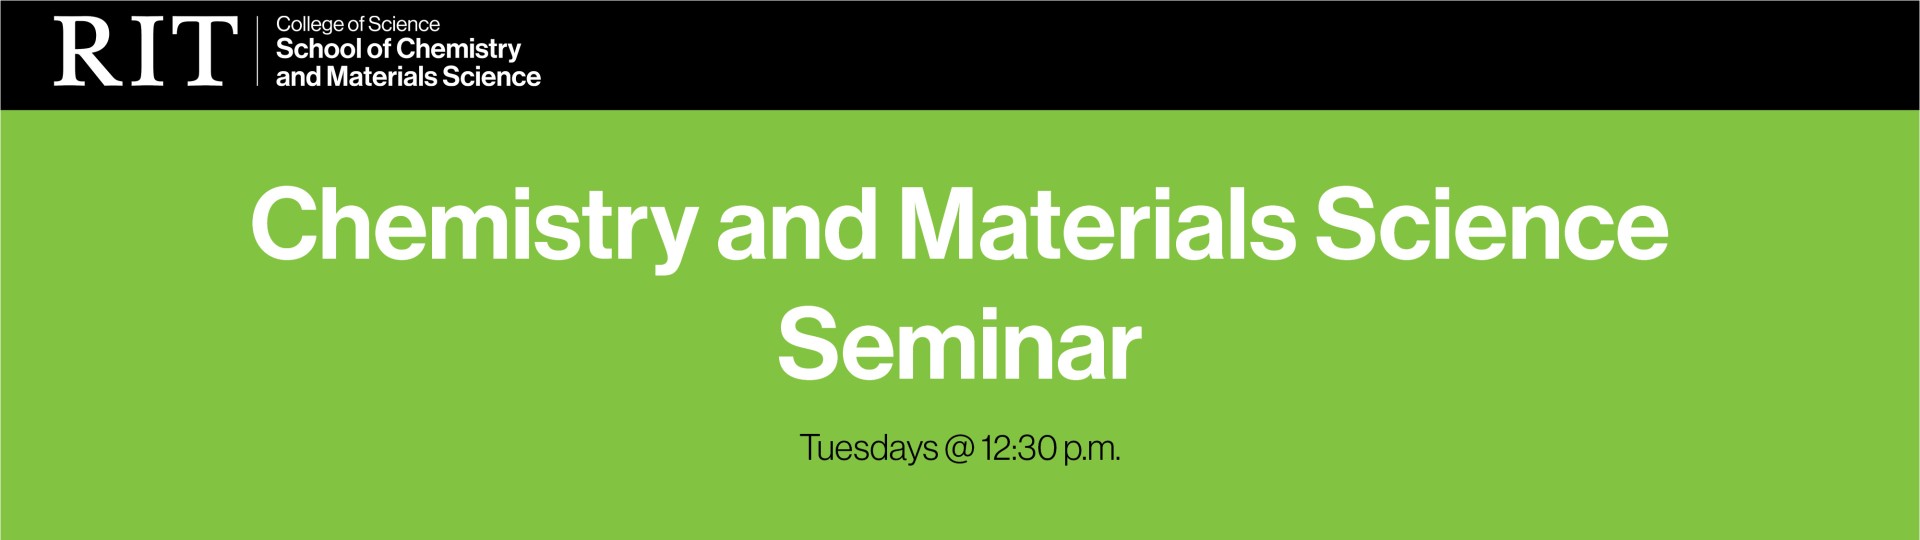 Chemistry and Material Science Seminar